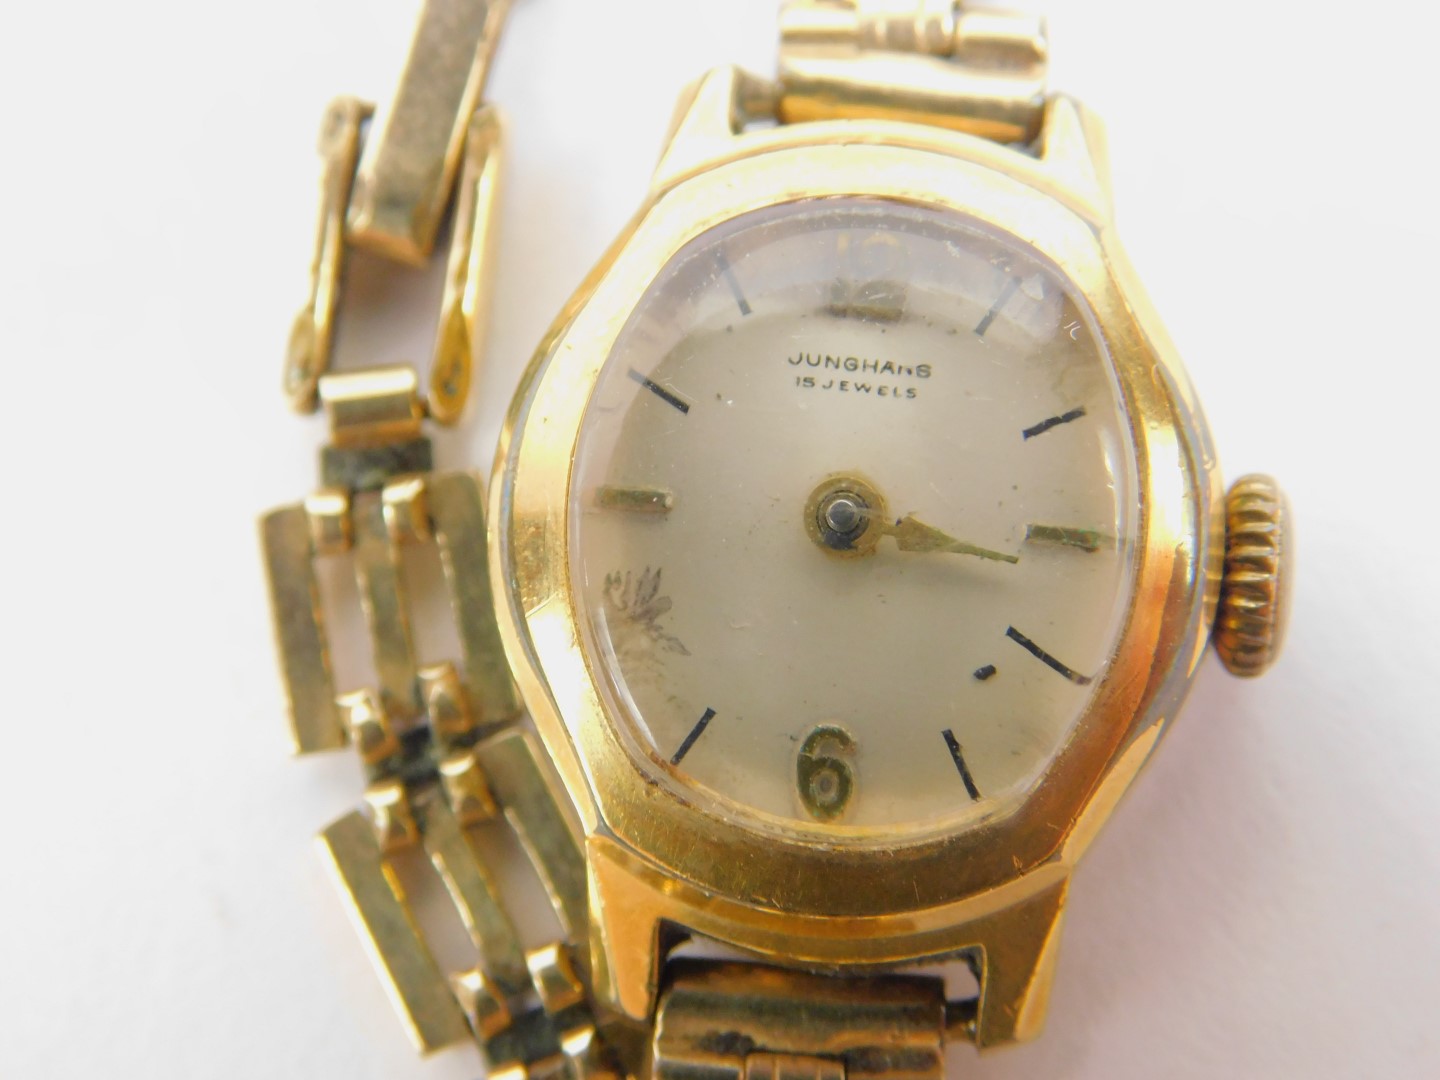 An Accurist lady's 9ct gold wristwatch, silvered dial with gold batons, on a textured gold bracelet, - Image 3 of 3